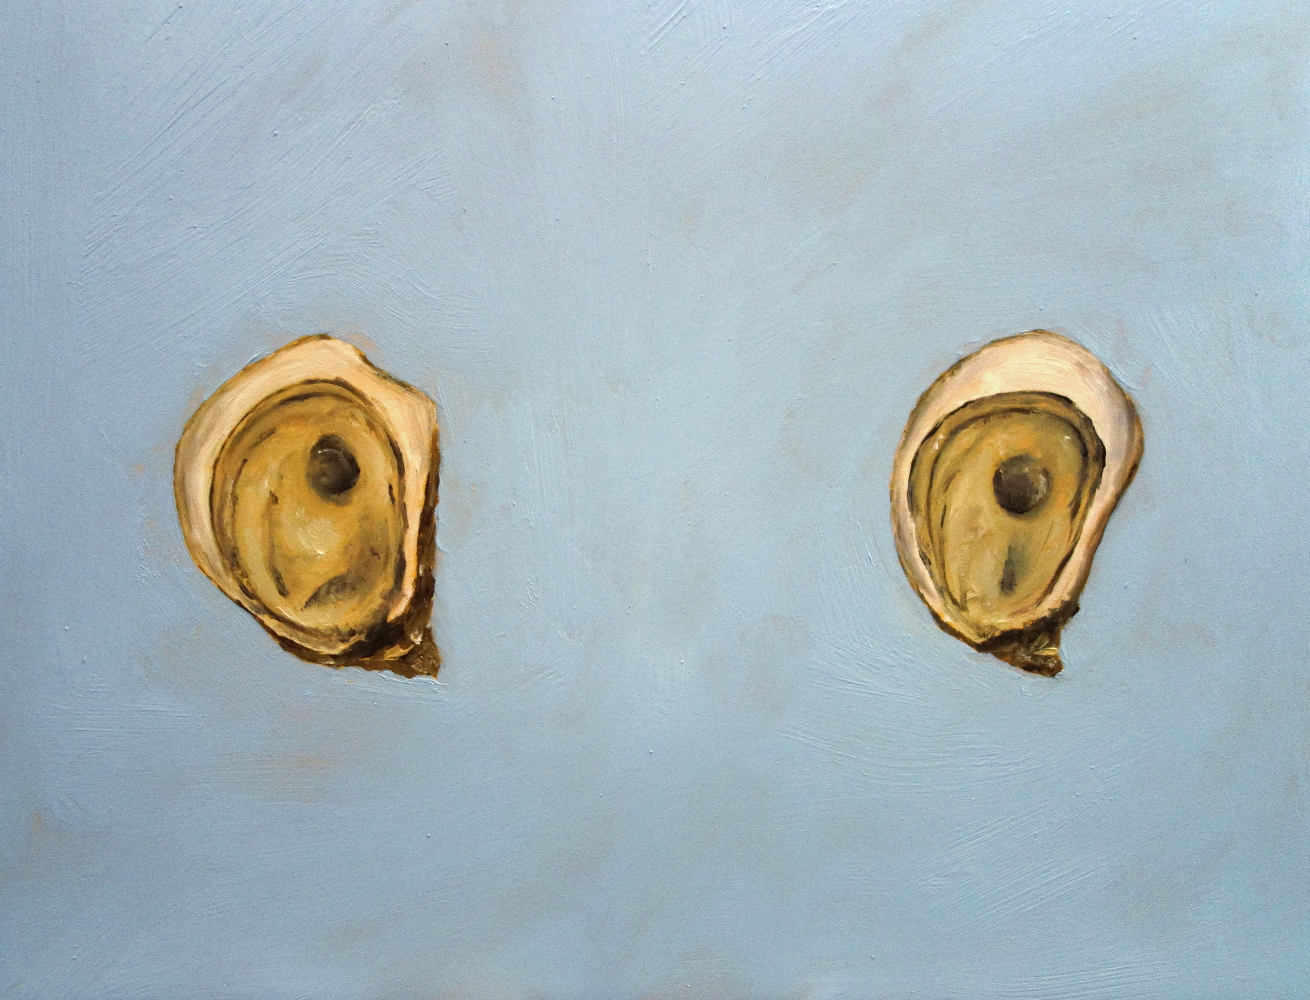 Two Oysters oil painting on panel